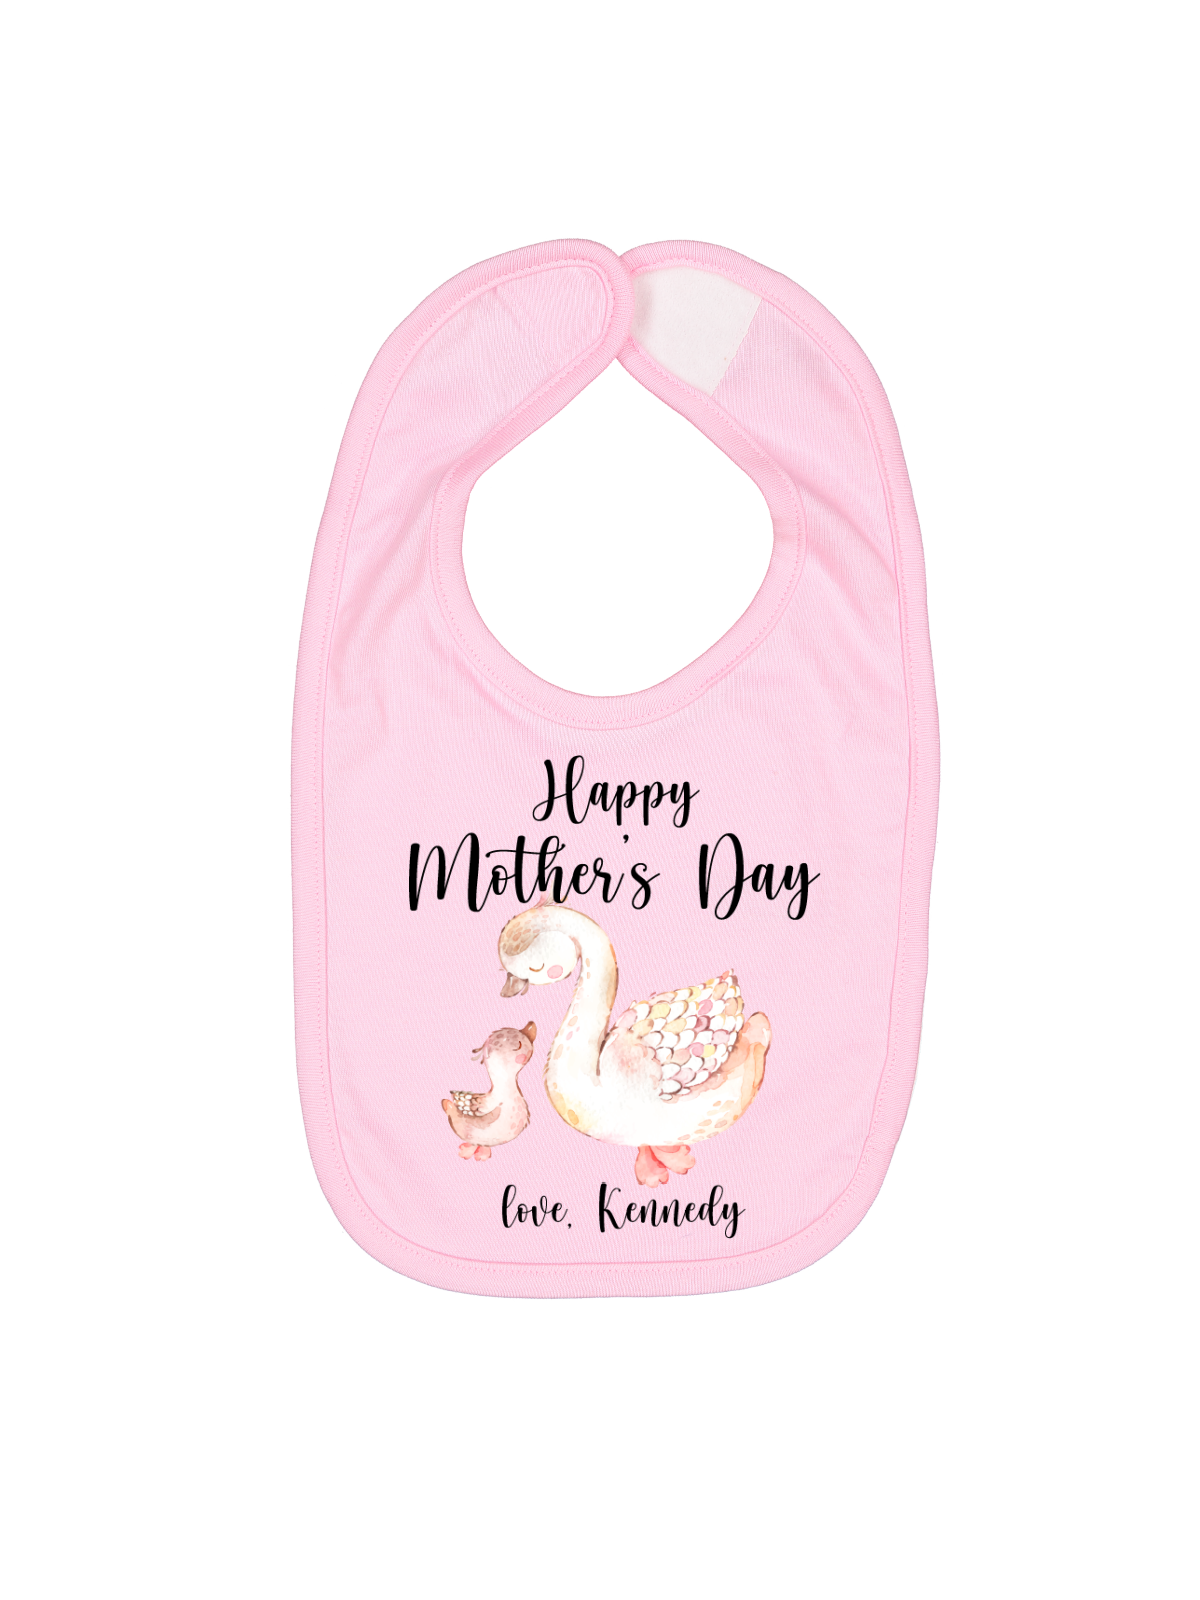 happy Mother's Day personalized pink baby bib